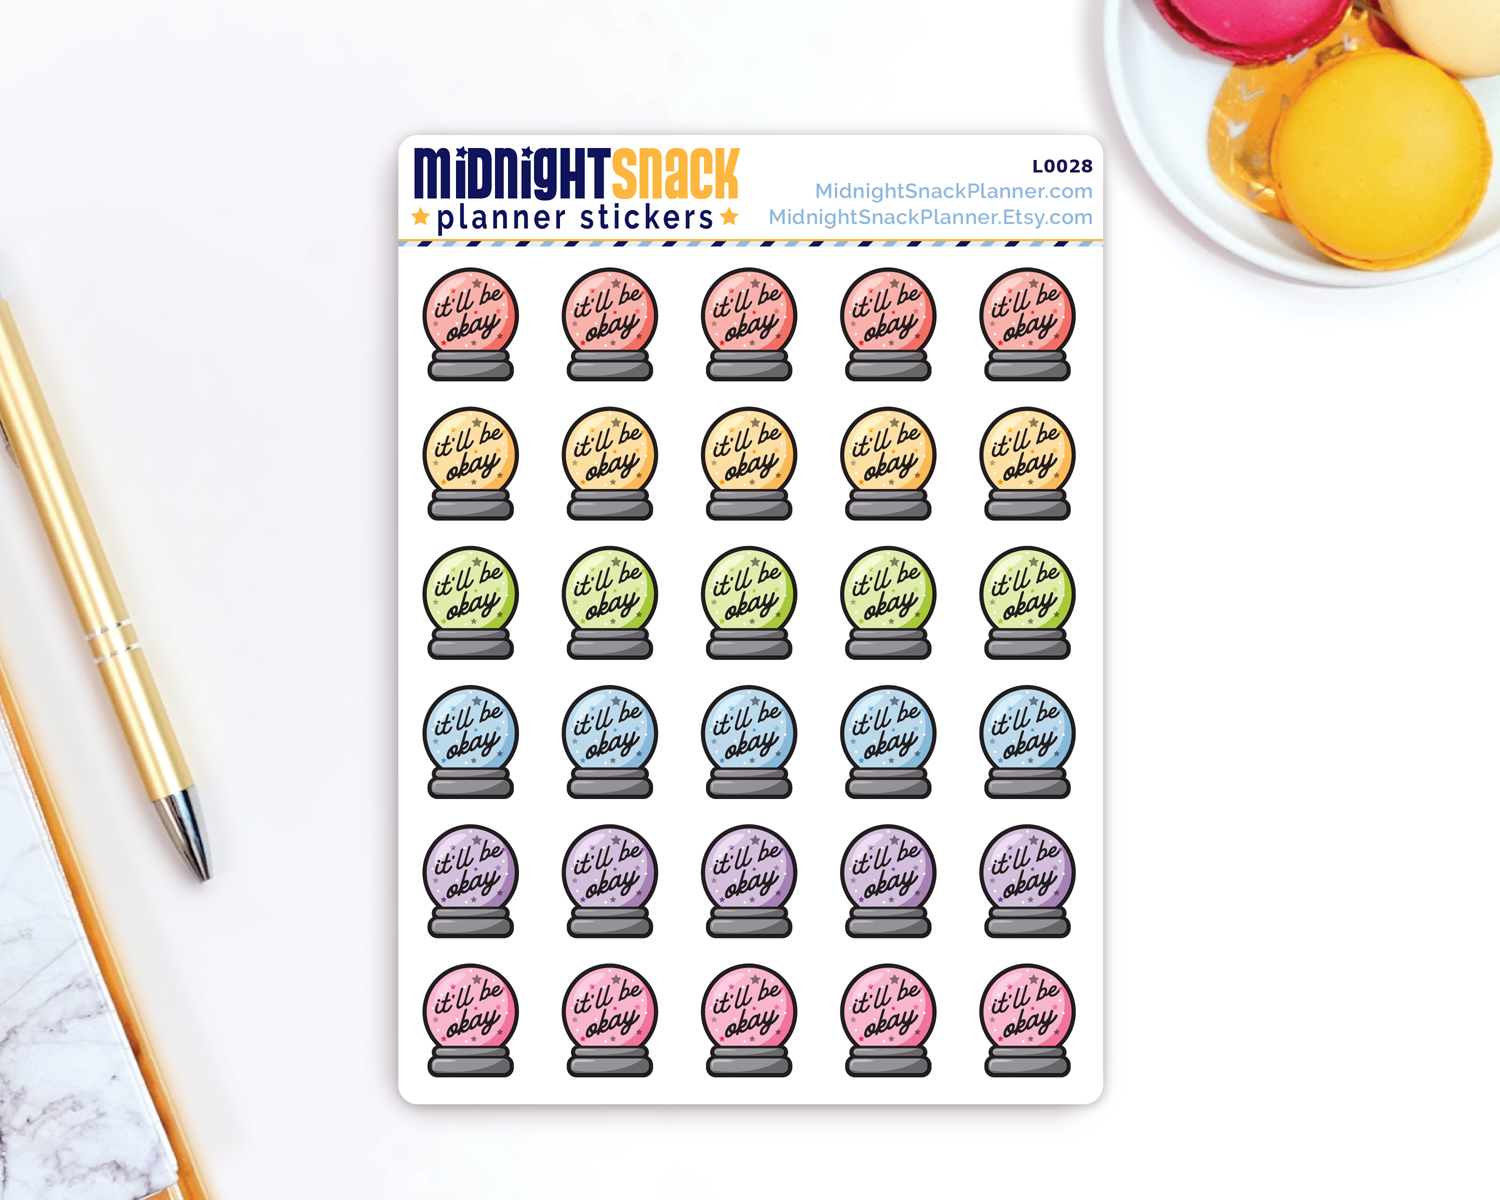 "It'll Be Okay" Crystal Ball Icon: Self Care Planner Stickers